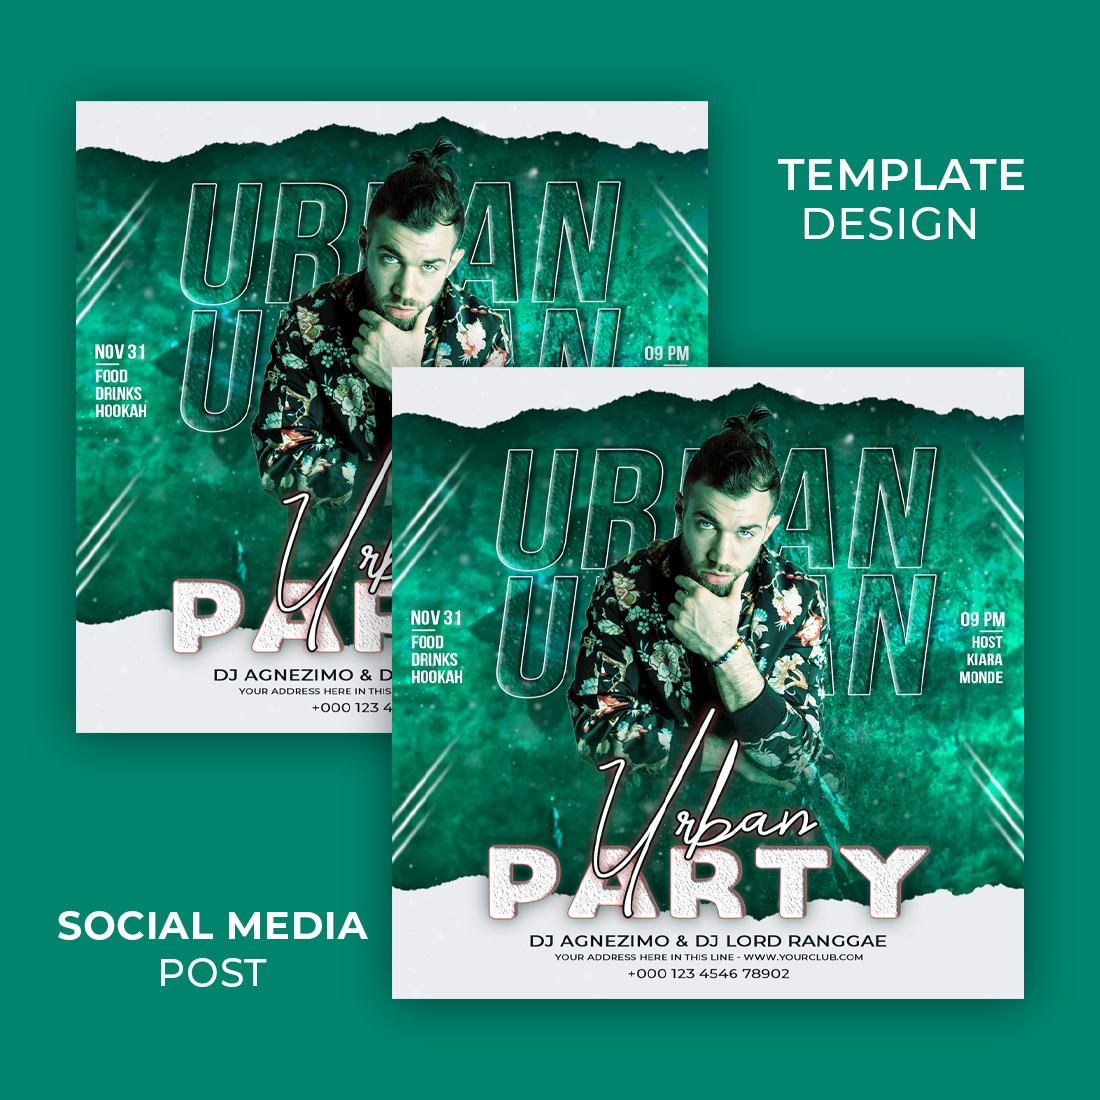 Urban party flyer social media post template cover image.